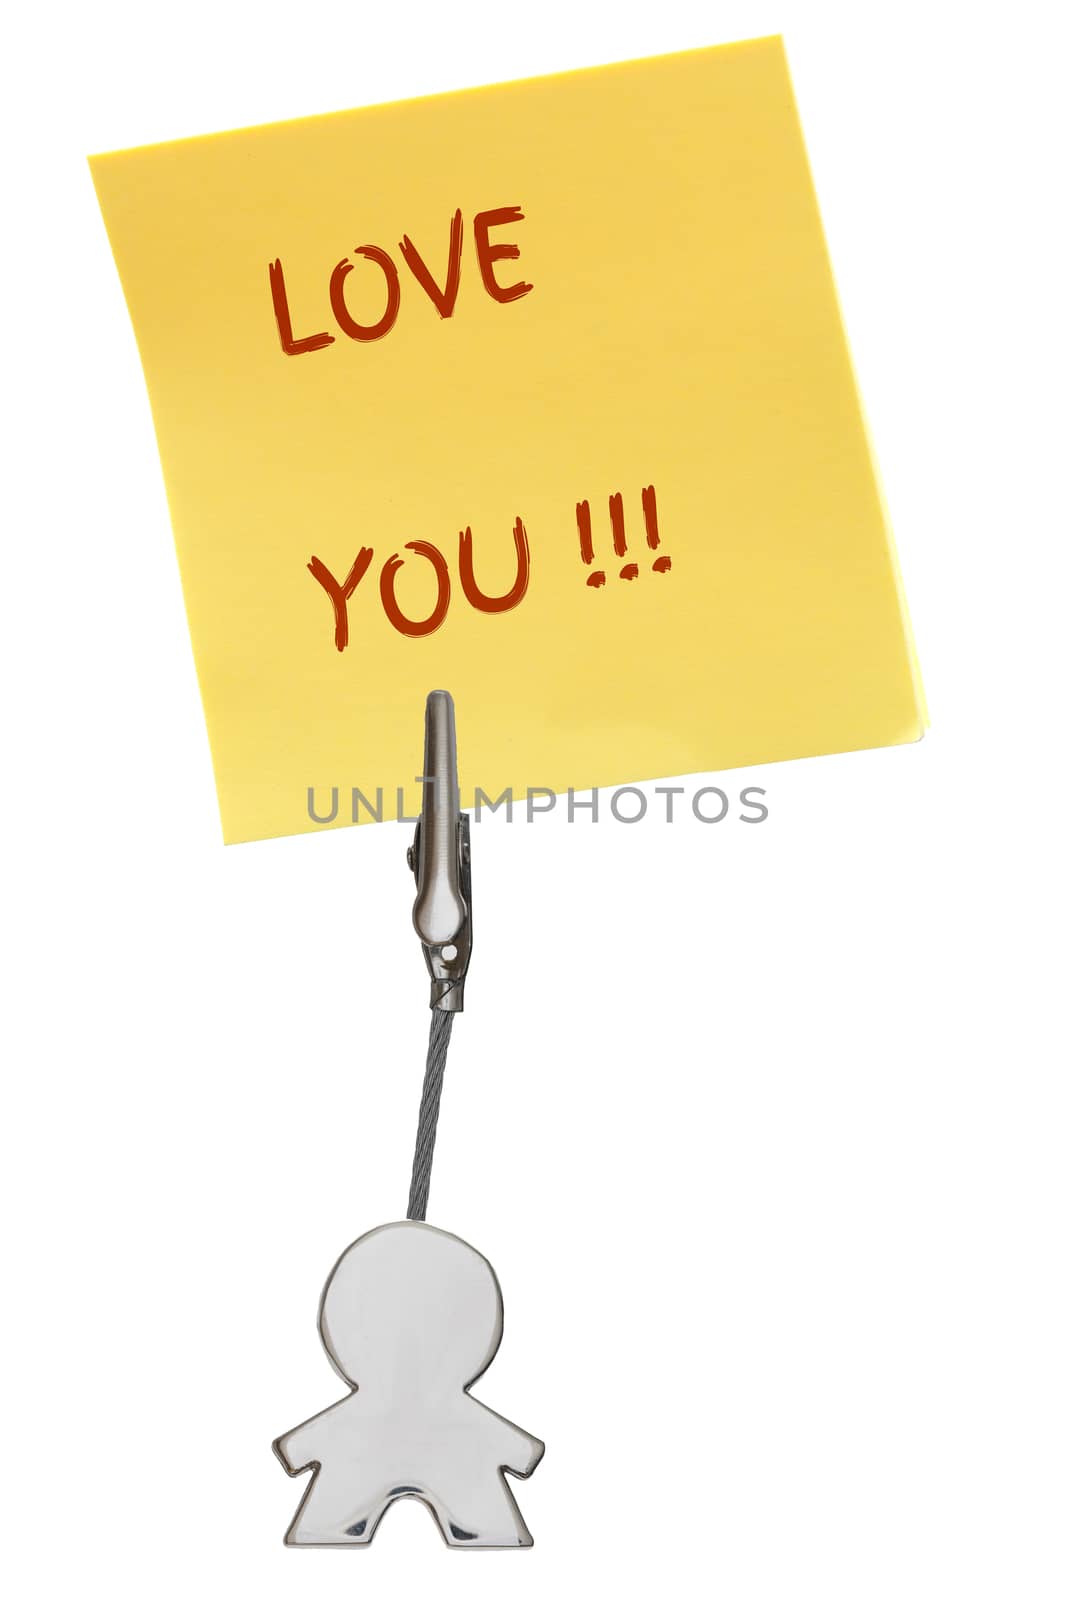 Man Figure Business Card Holder with clip holding a yellow paper note LOVE YOU; isolated on white background, customizable